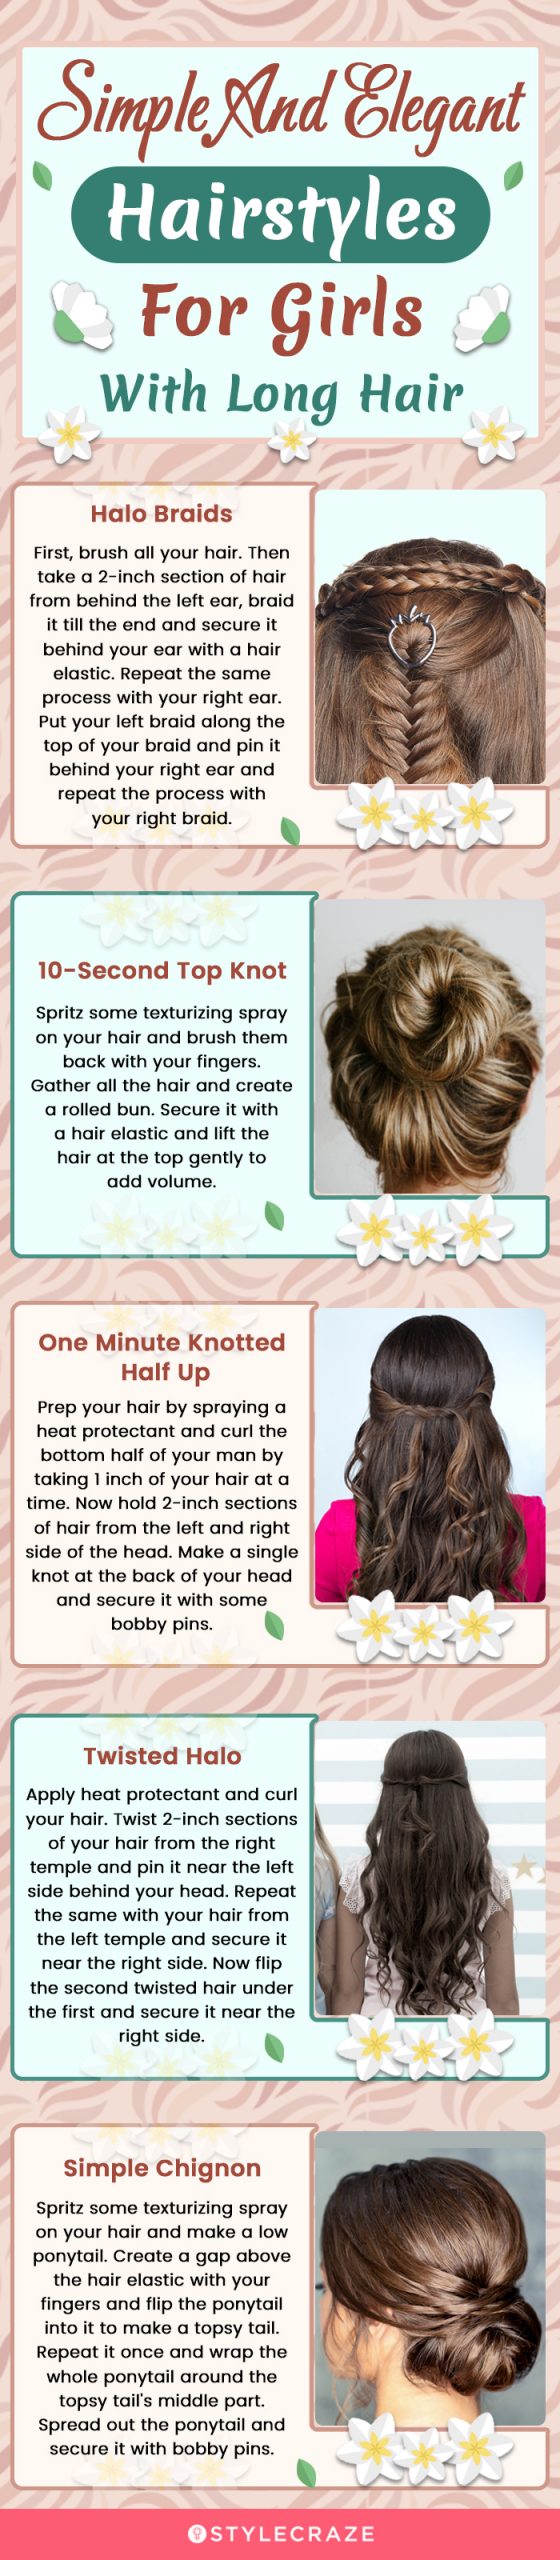 simple and elegant hairstyles for girls with long hair [infographic]